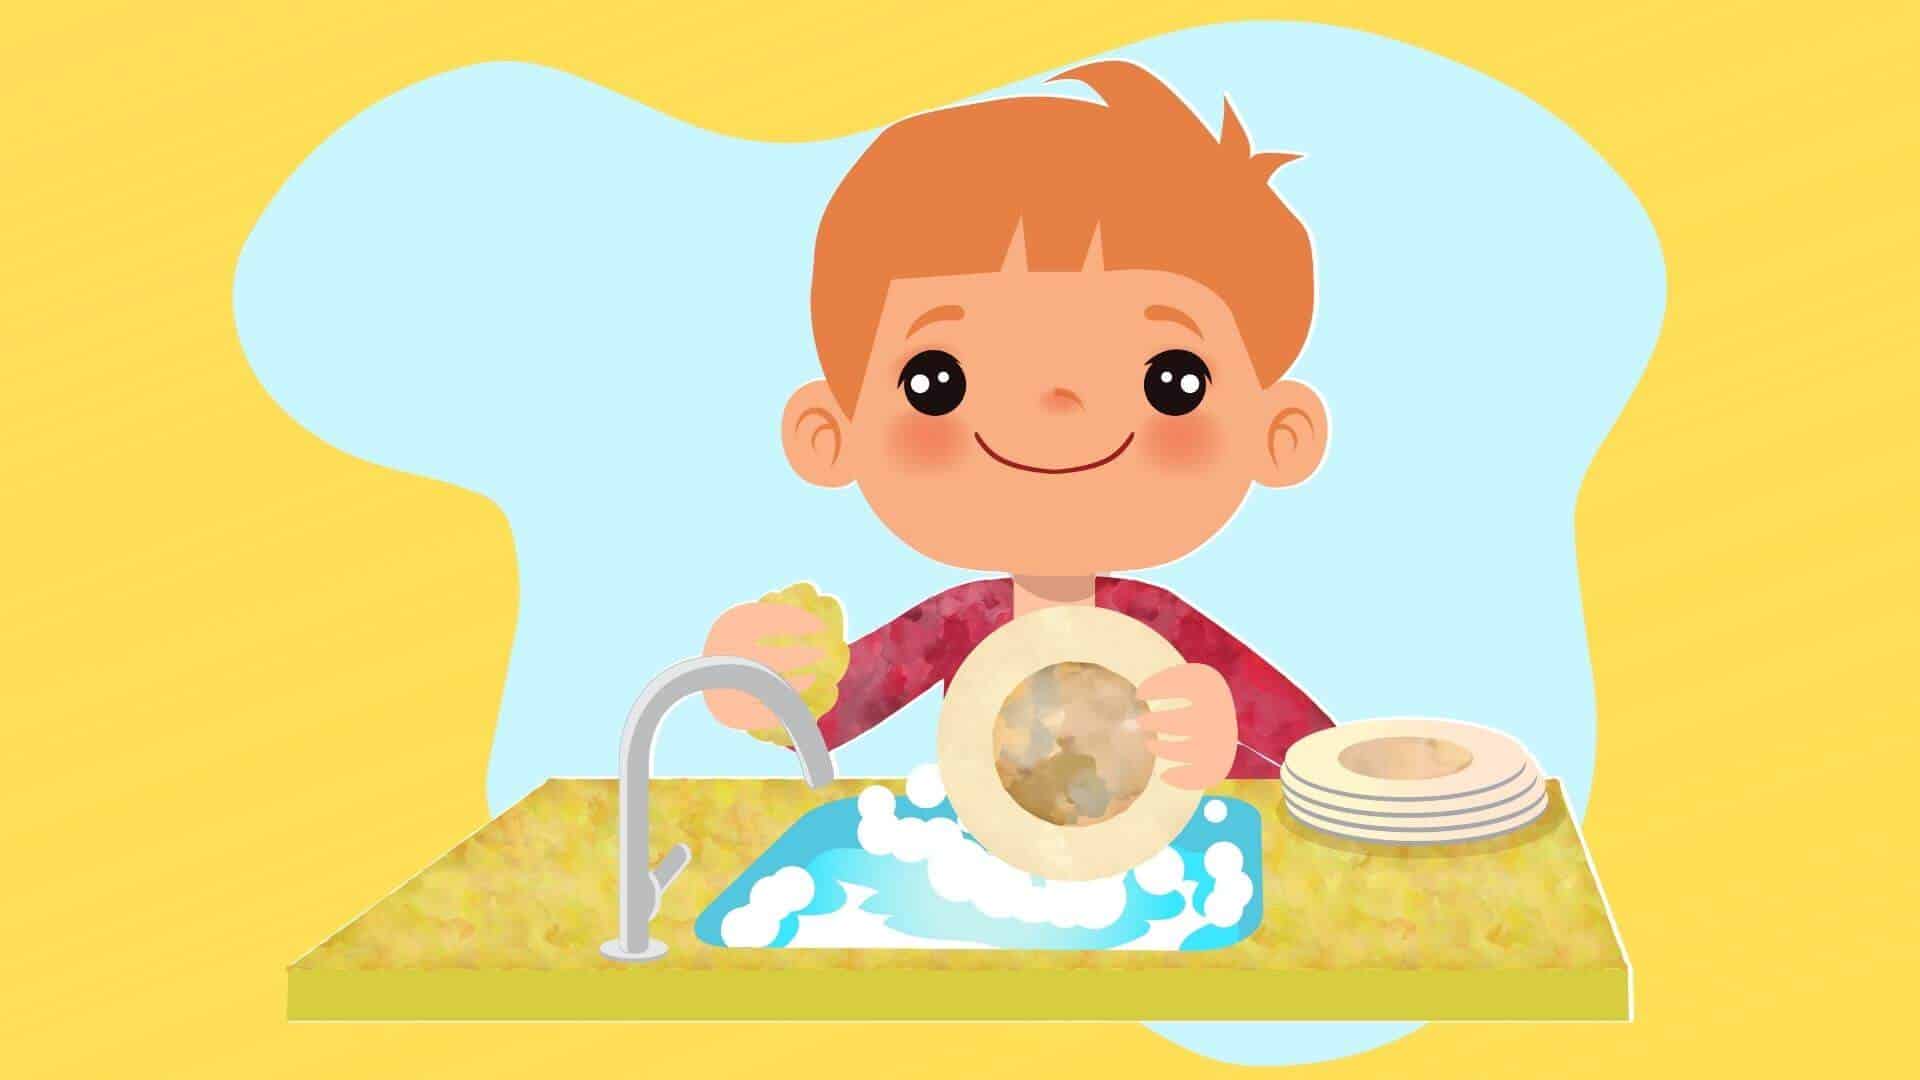 work at home jobs for 10 year olds graphic of young boy with red hair washing dishes